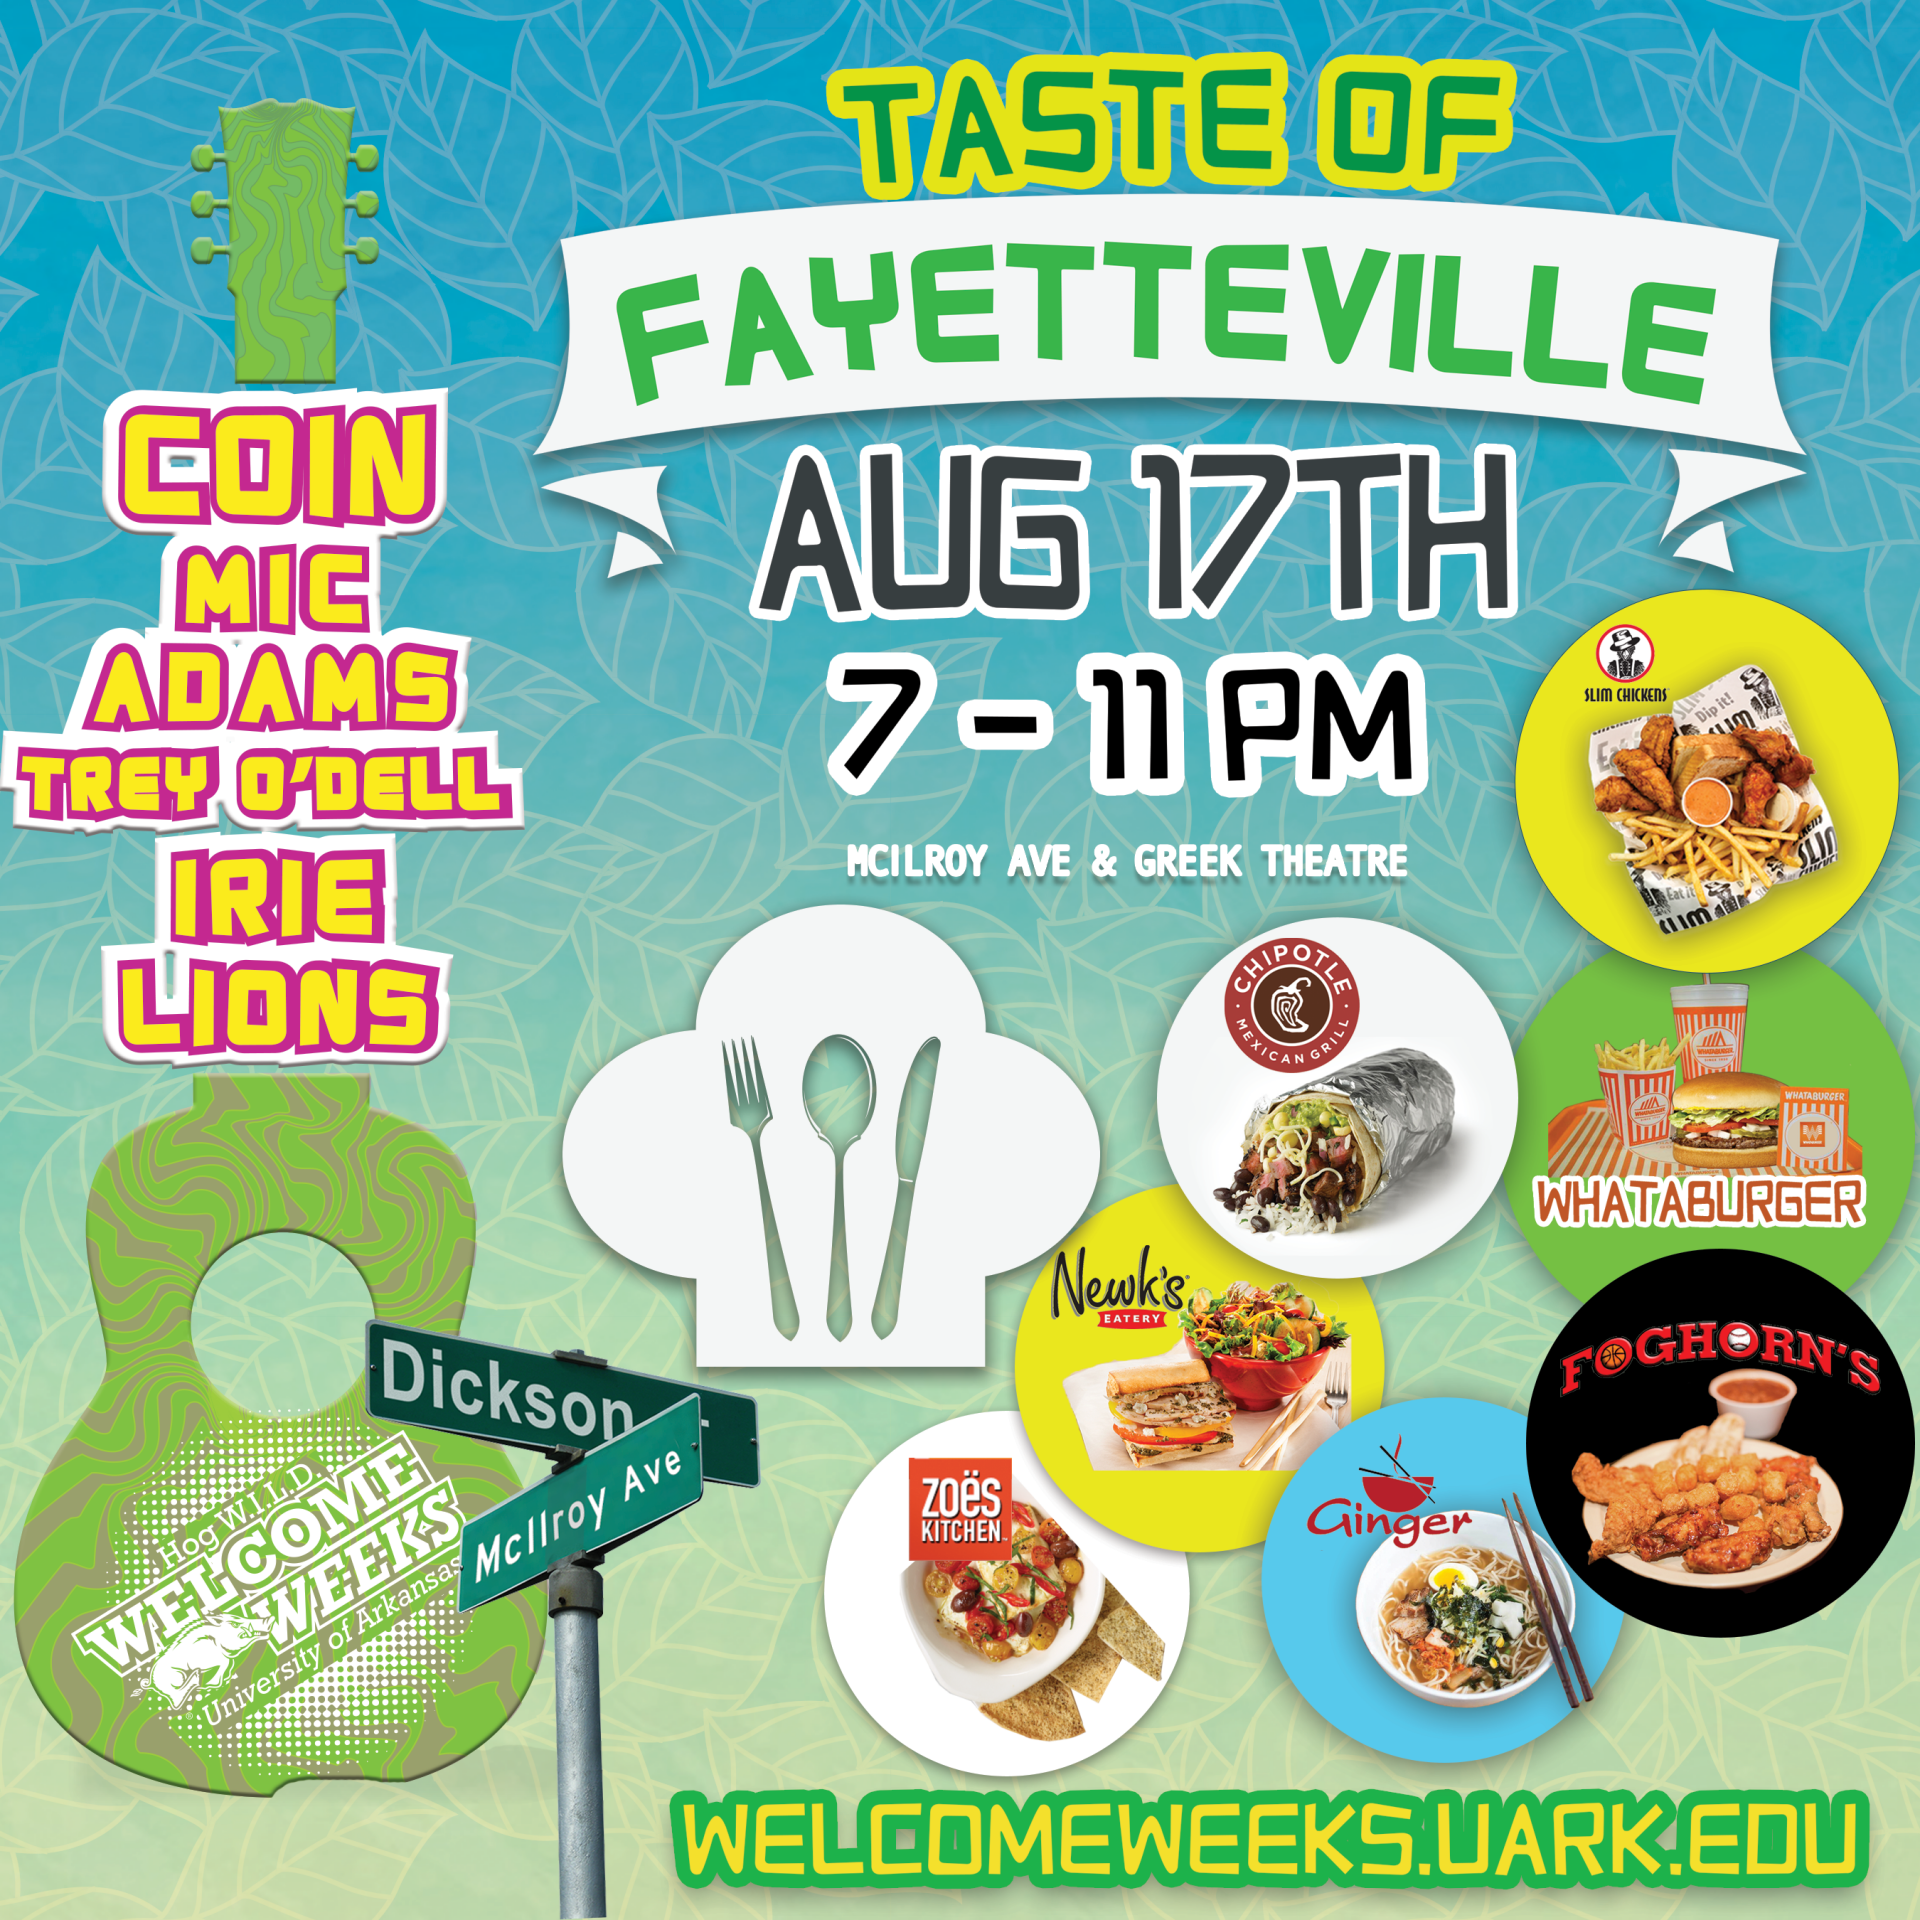 Hungry for Good Times? Check Out the Taste of Fayetteville